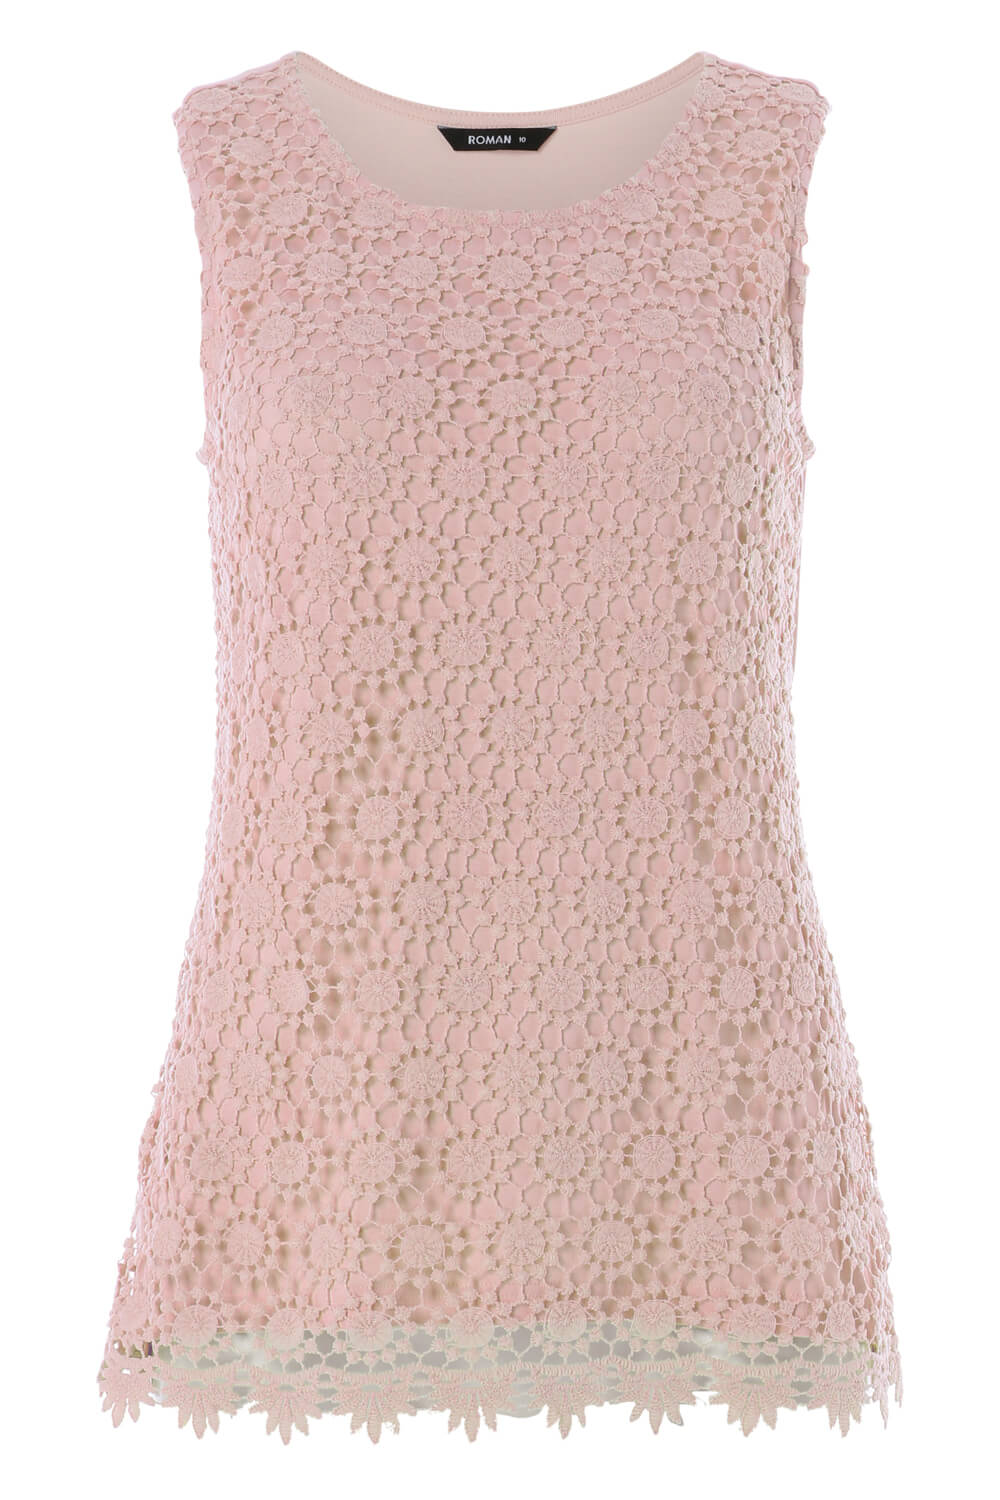 Light Pink Lace Front Jersey Vest Top, Image 4 of 8